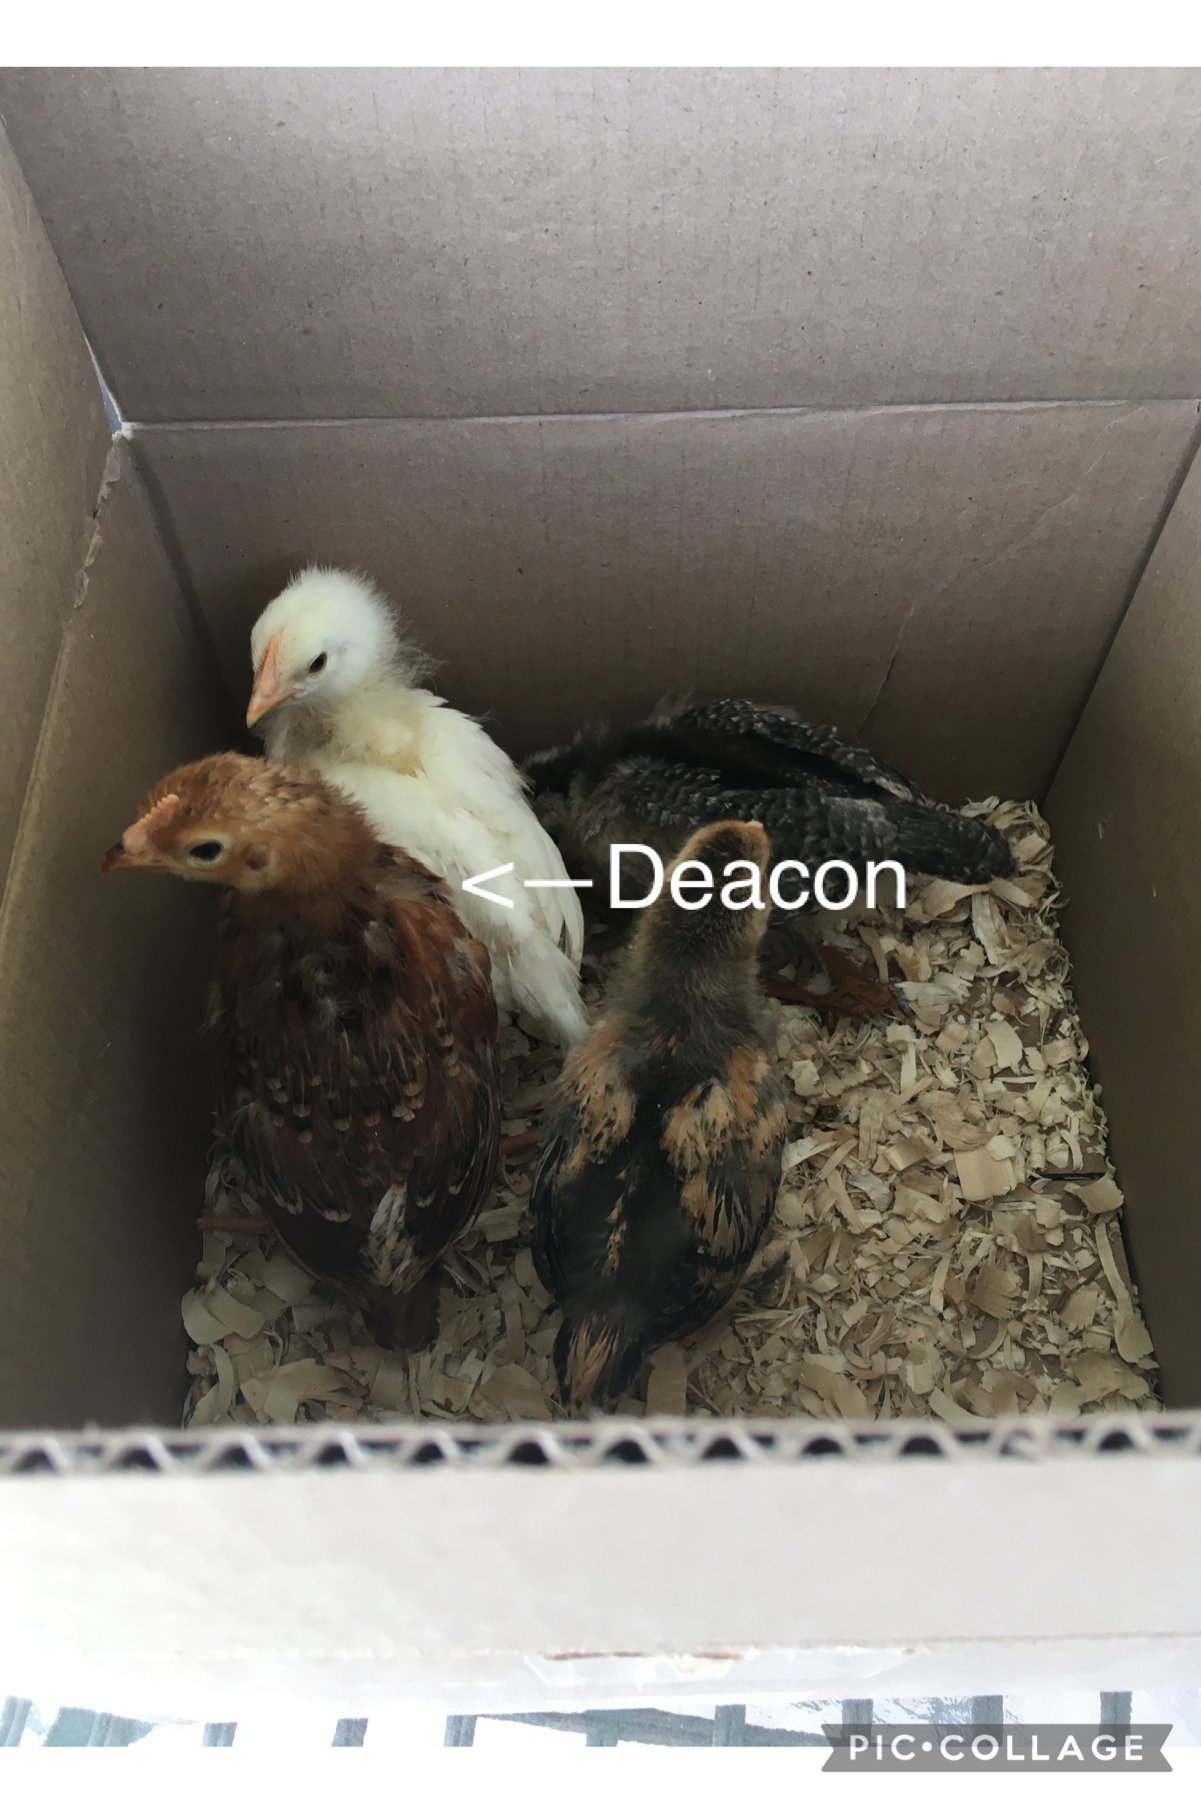 🐥TAP!🐥
Deacon and some friends went to their new home today! It’s sad to see them go, but at least they’re not going to strangers (and they’ll keep us updated). Goodbye, birdie! 